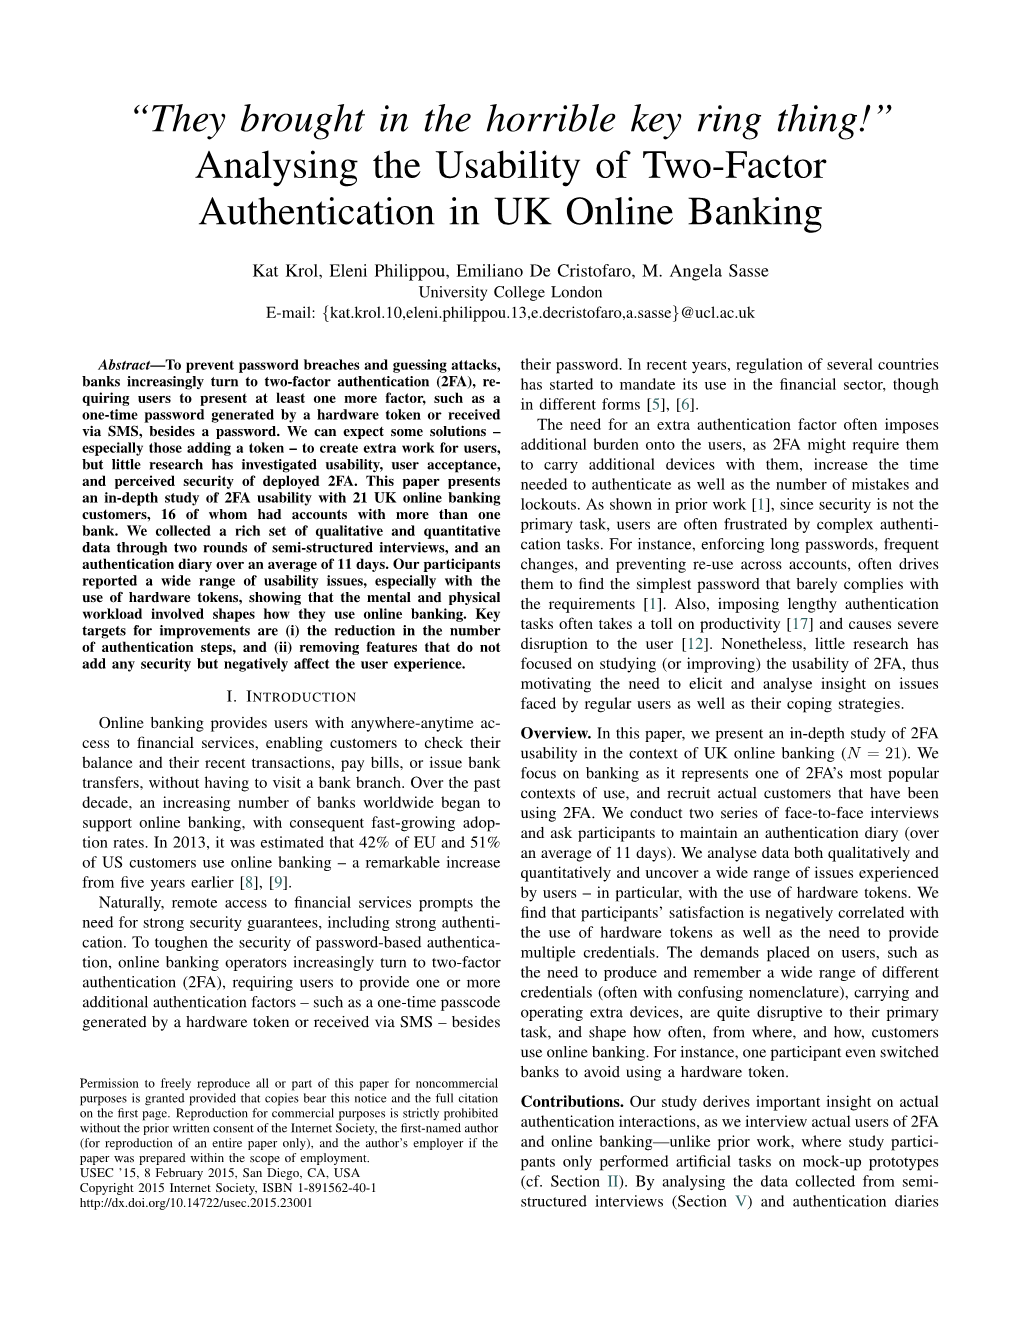 Analysing the Usability of Two-Factor Authentication in UK Online Banking